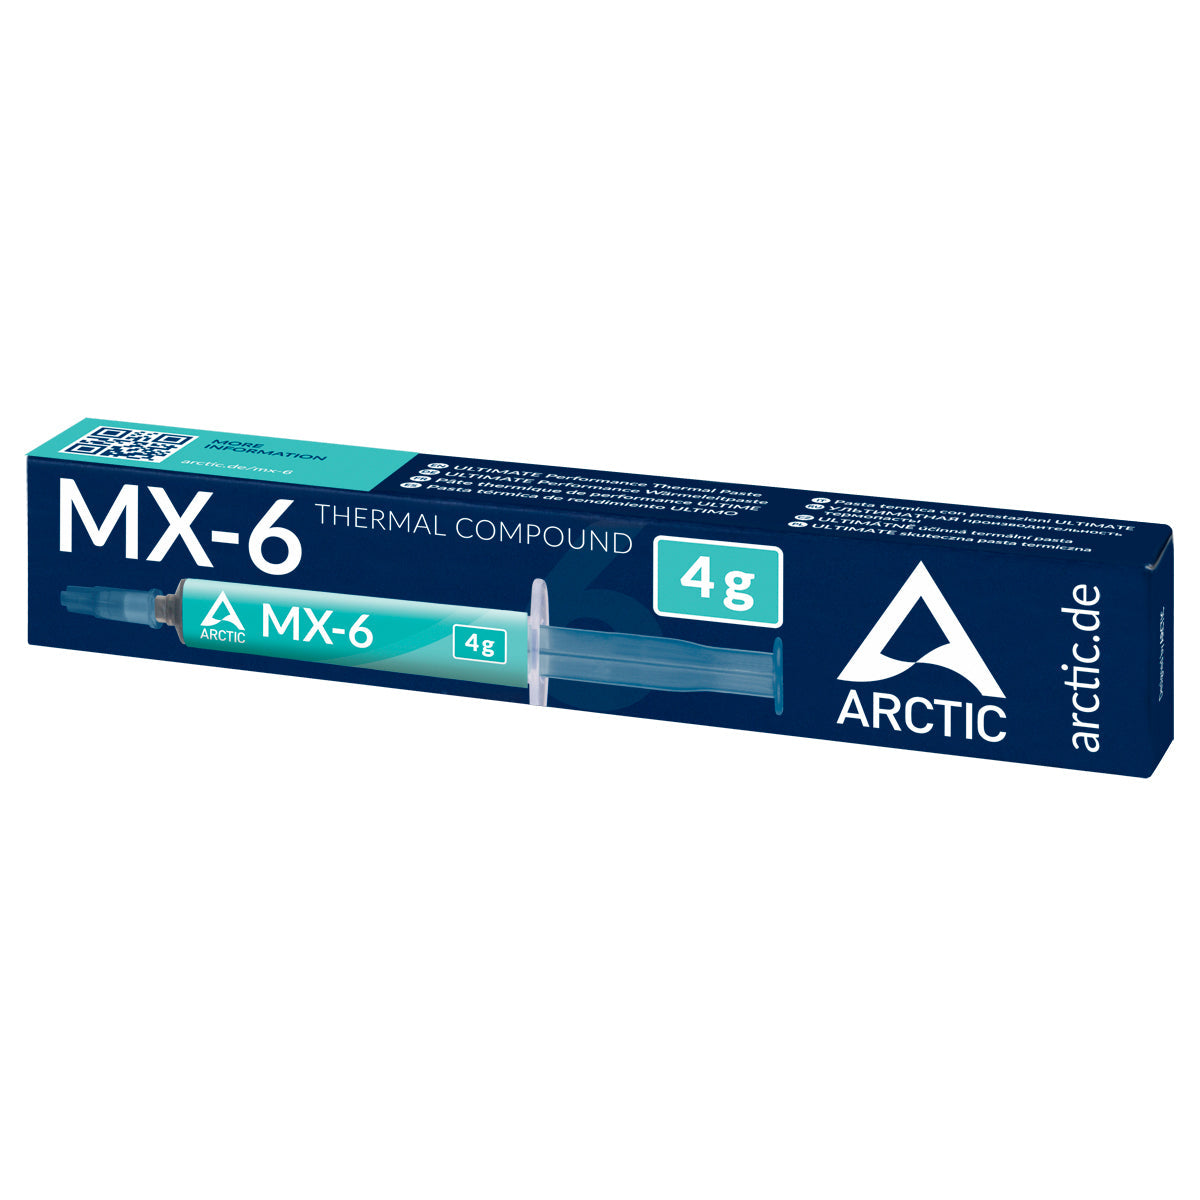 Arctic MX-6 (4g) | Thermal Compound